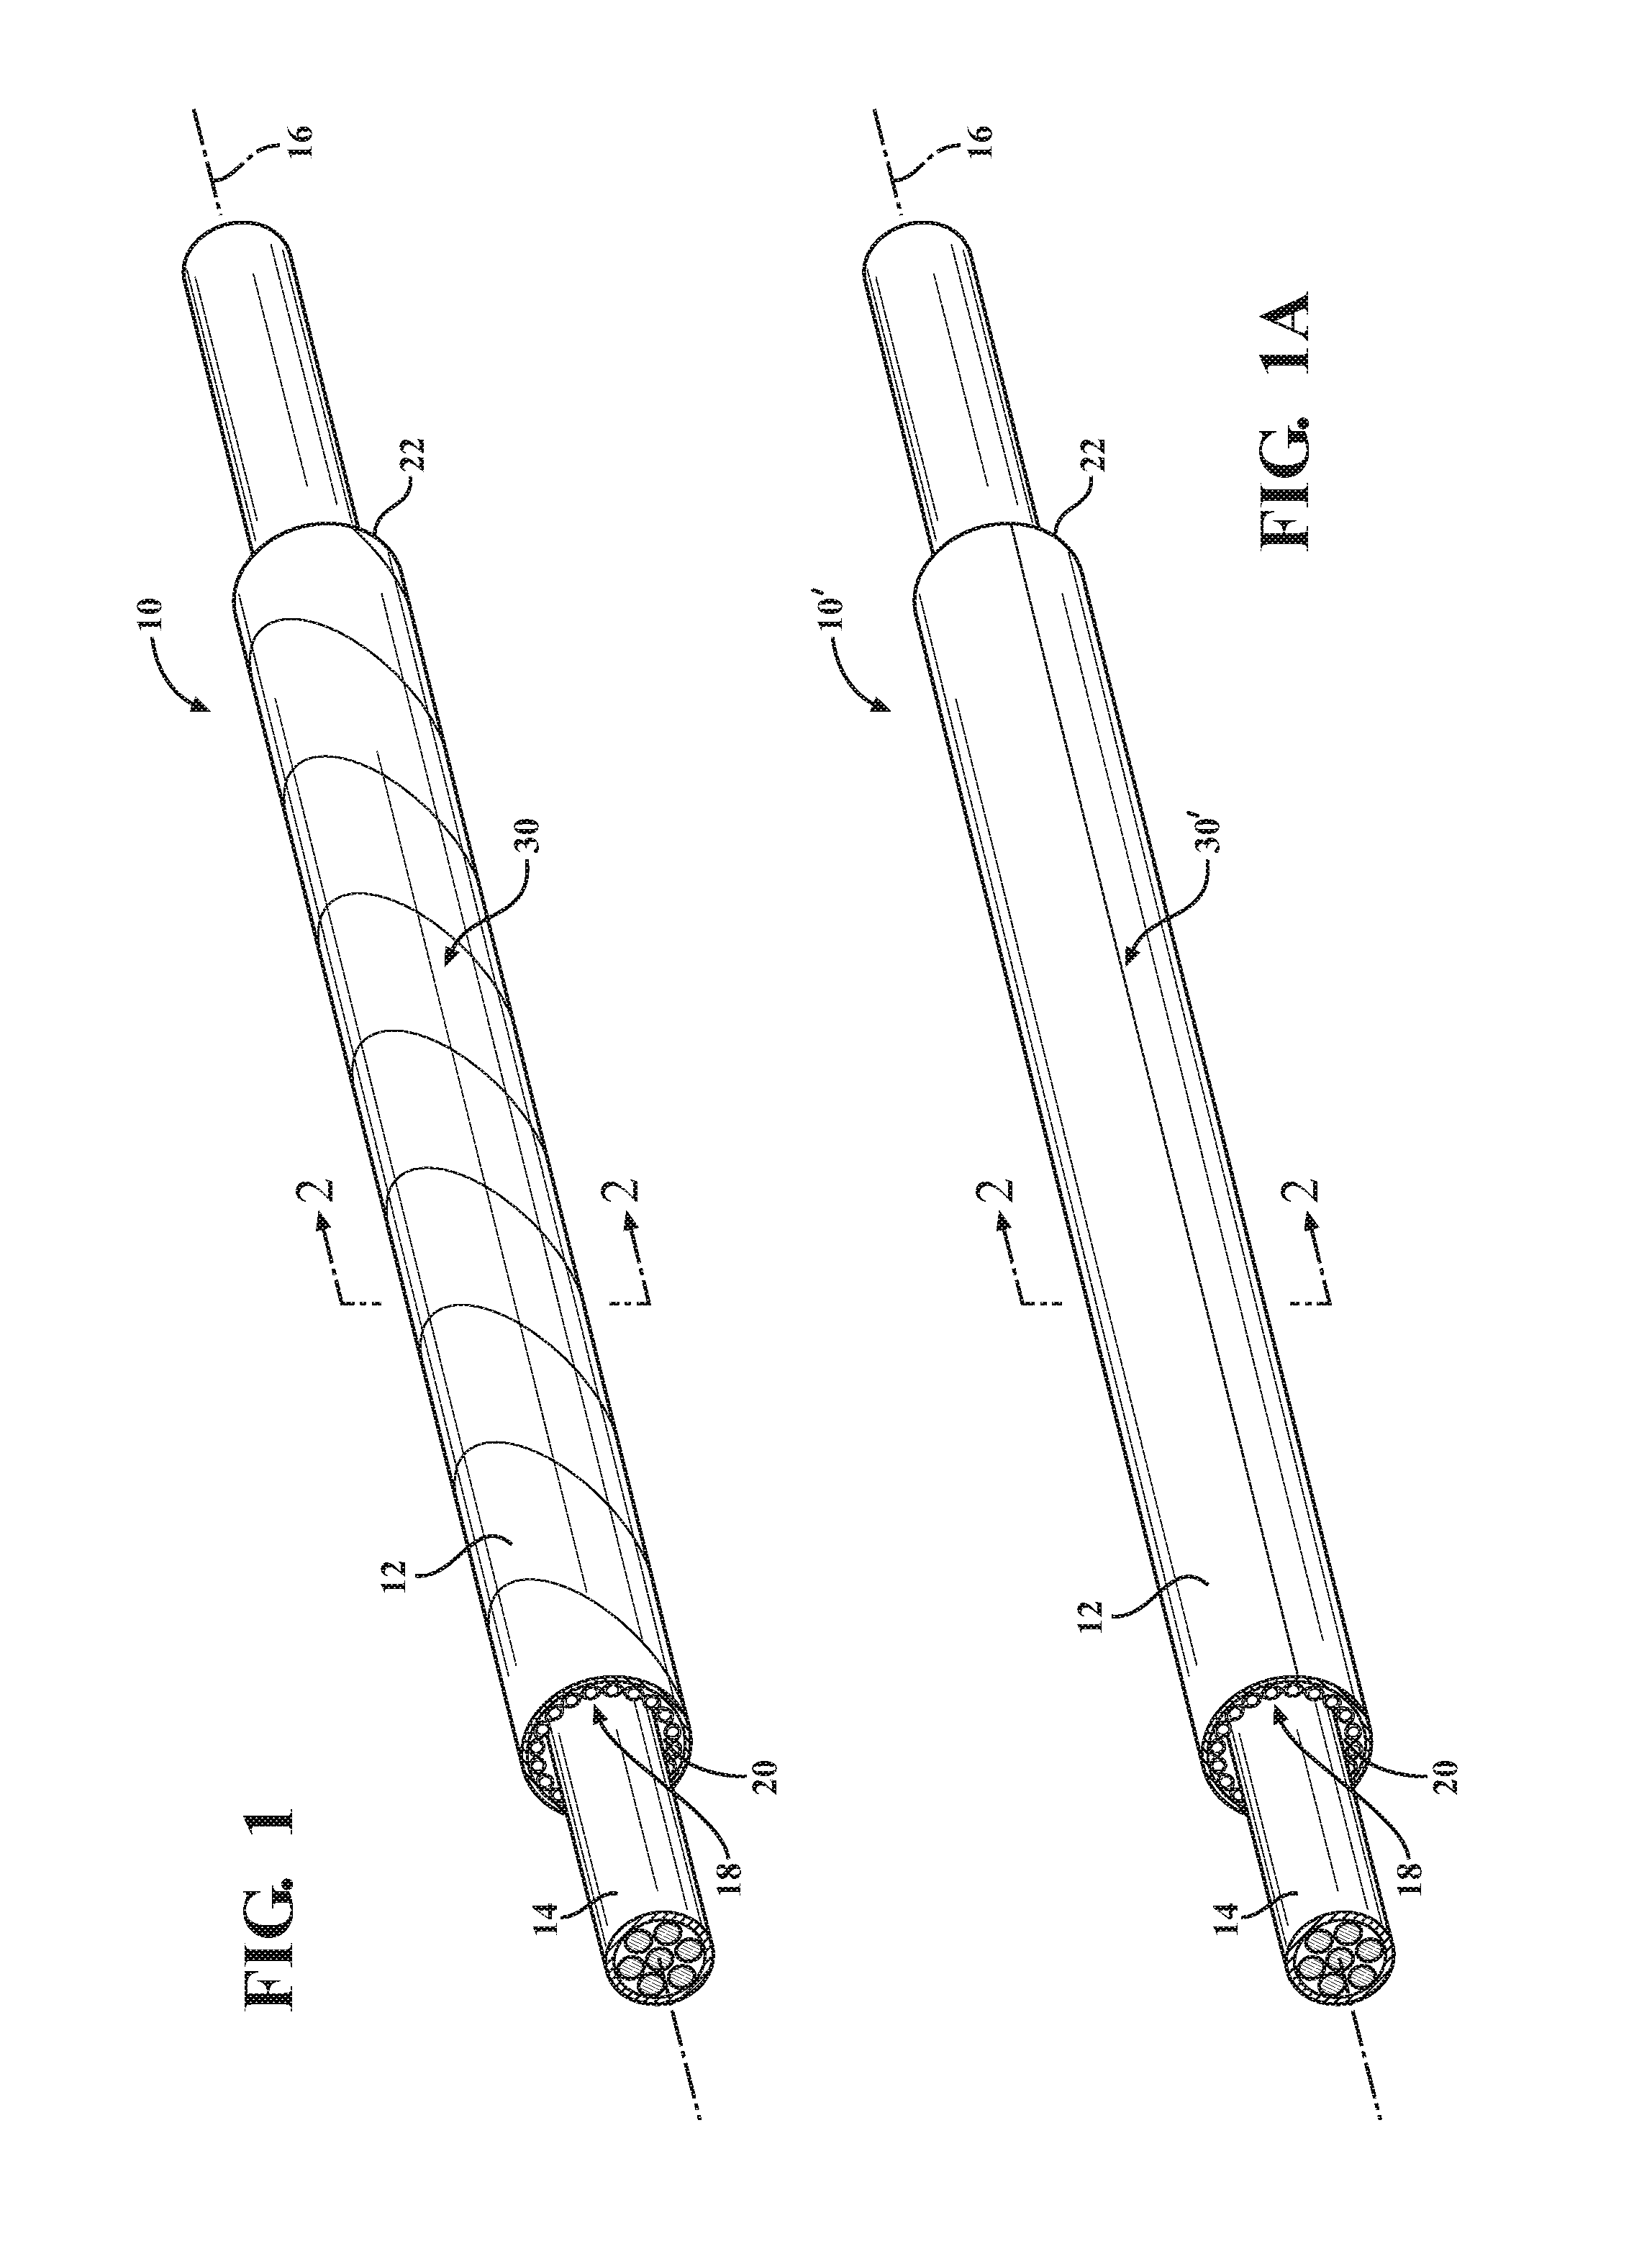 Woven tubular thermal sleeve and method of construction thereof